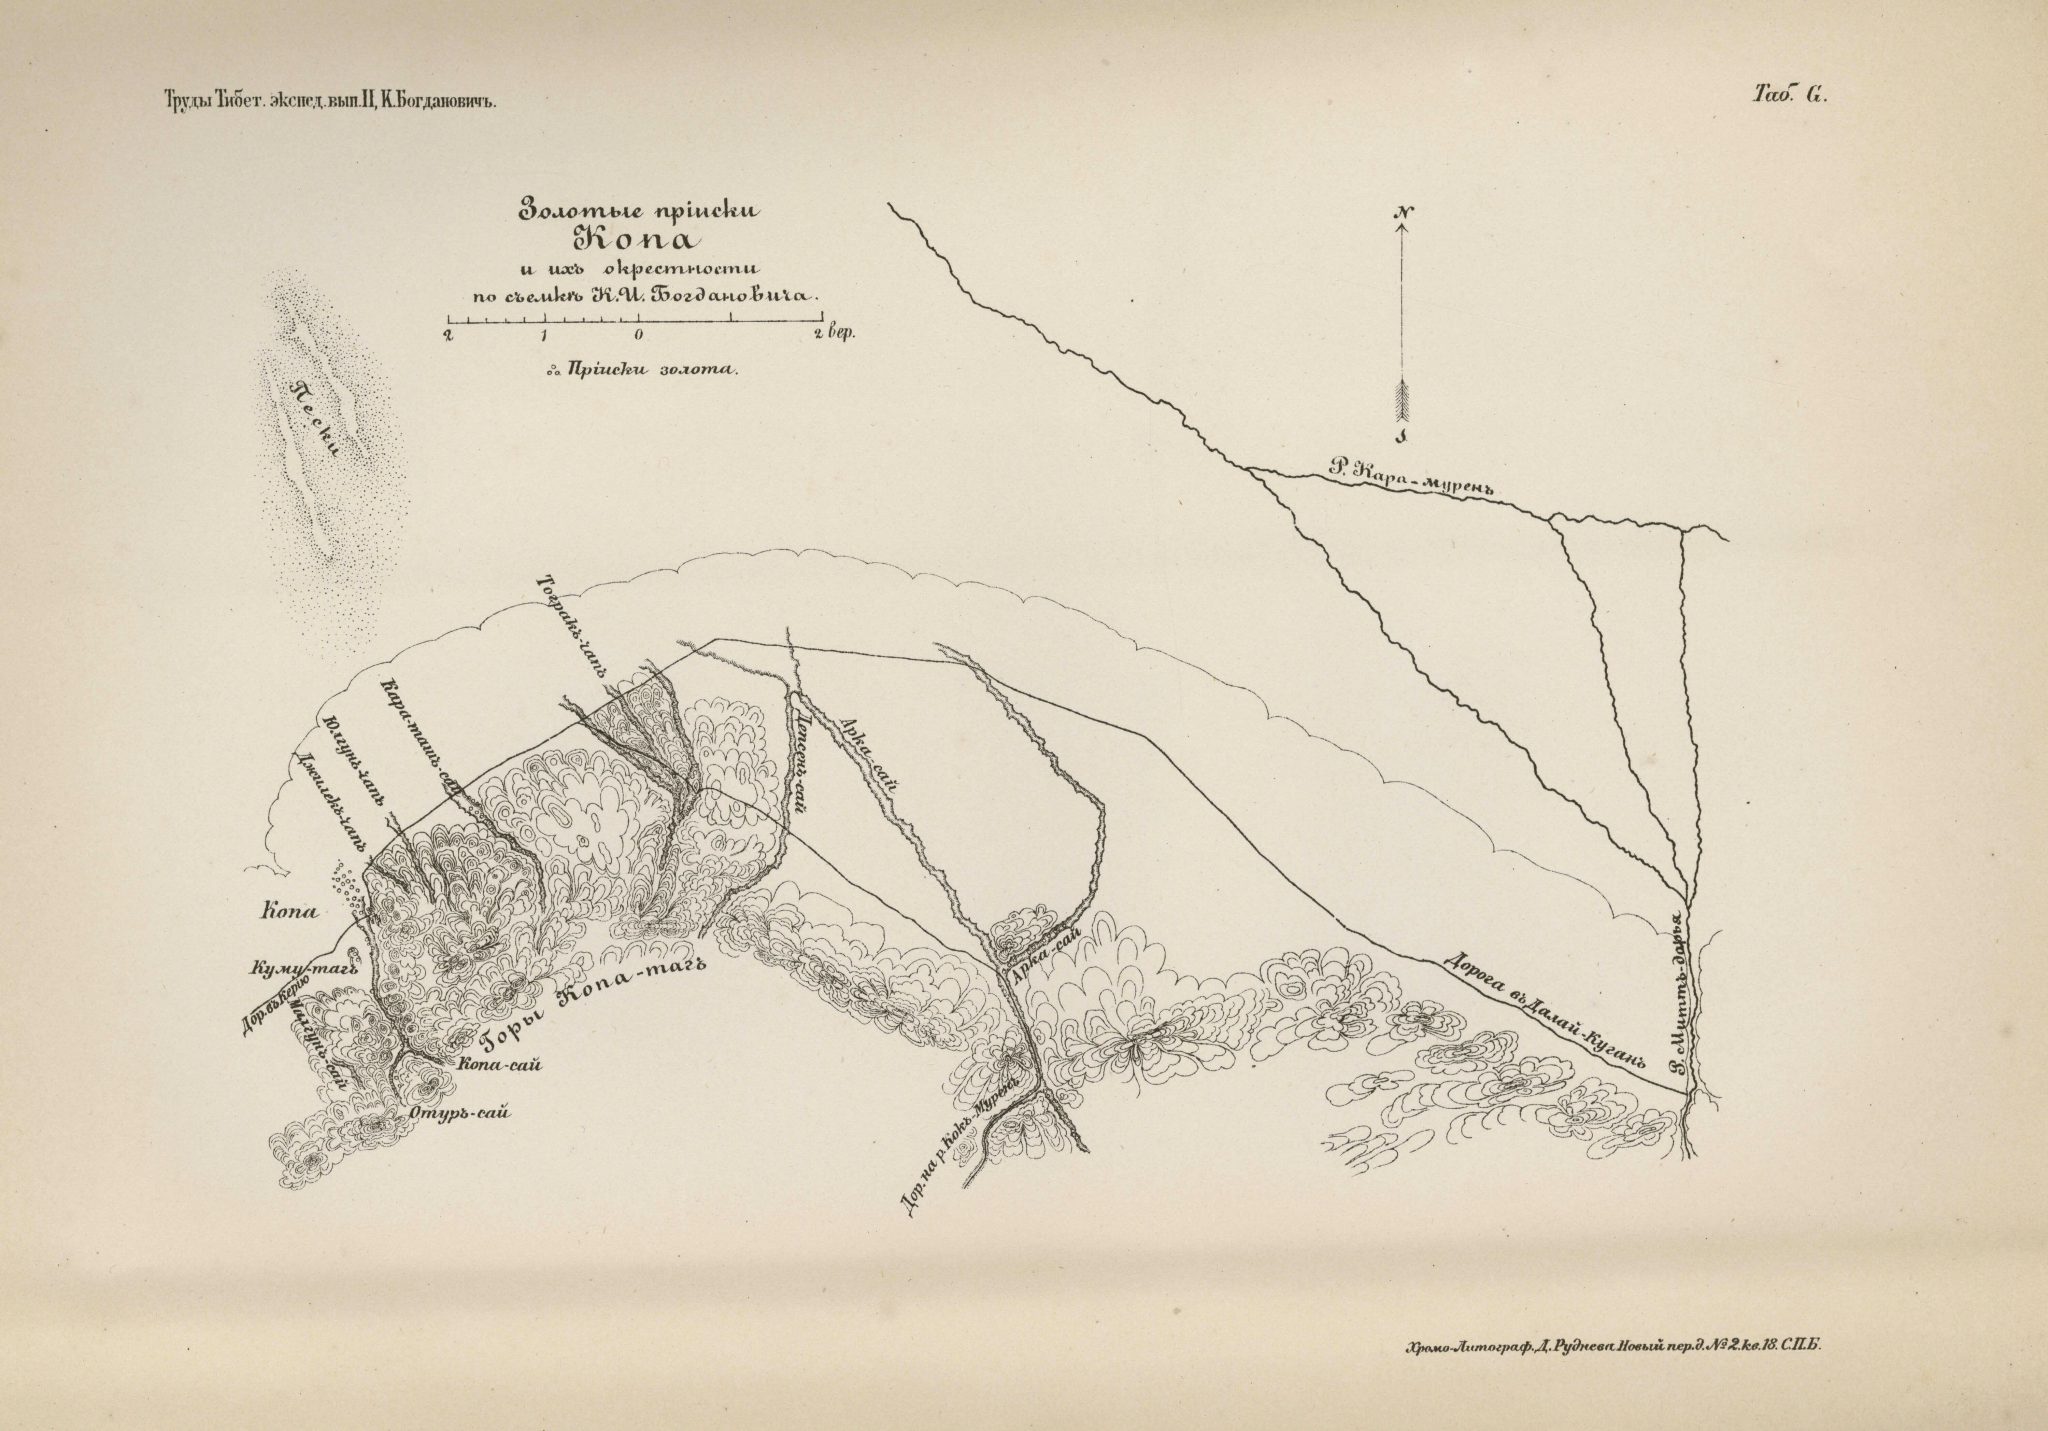 Gold mines in Kopa and the surroundings 1892